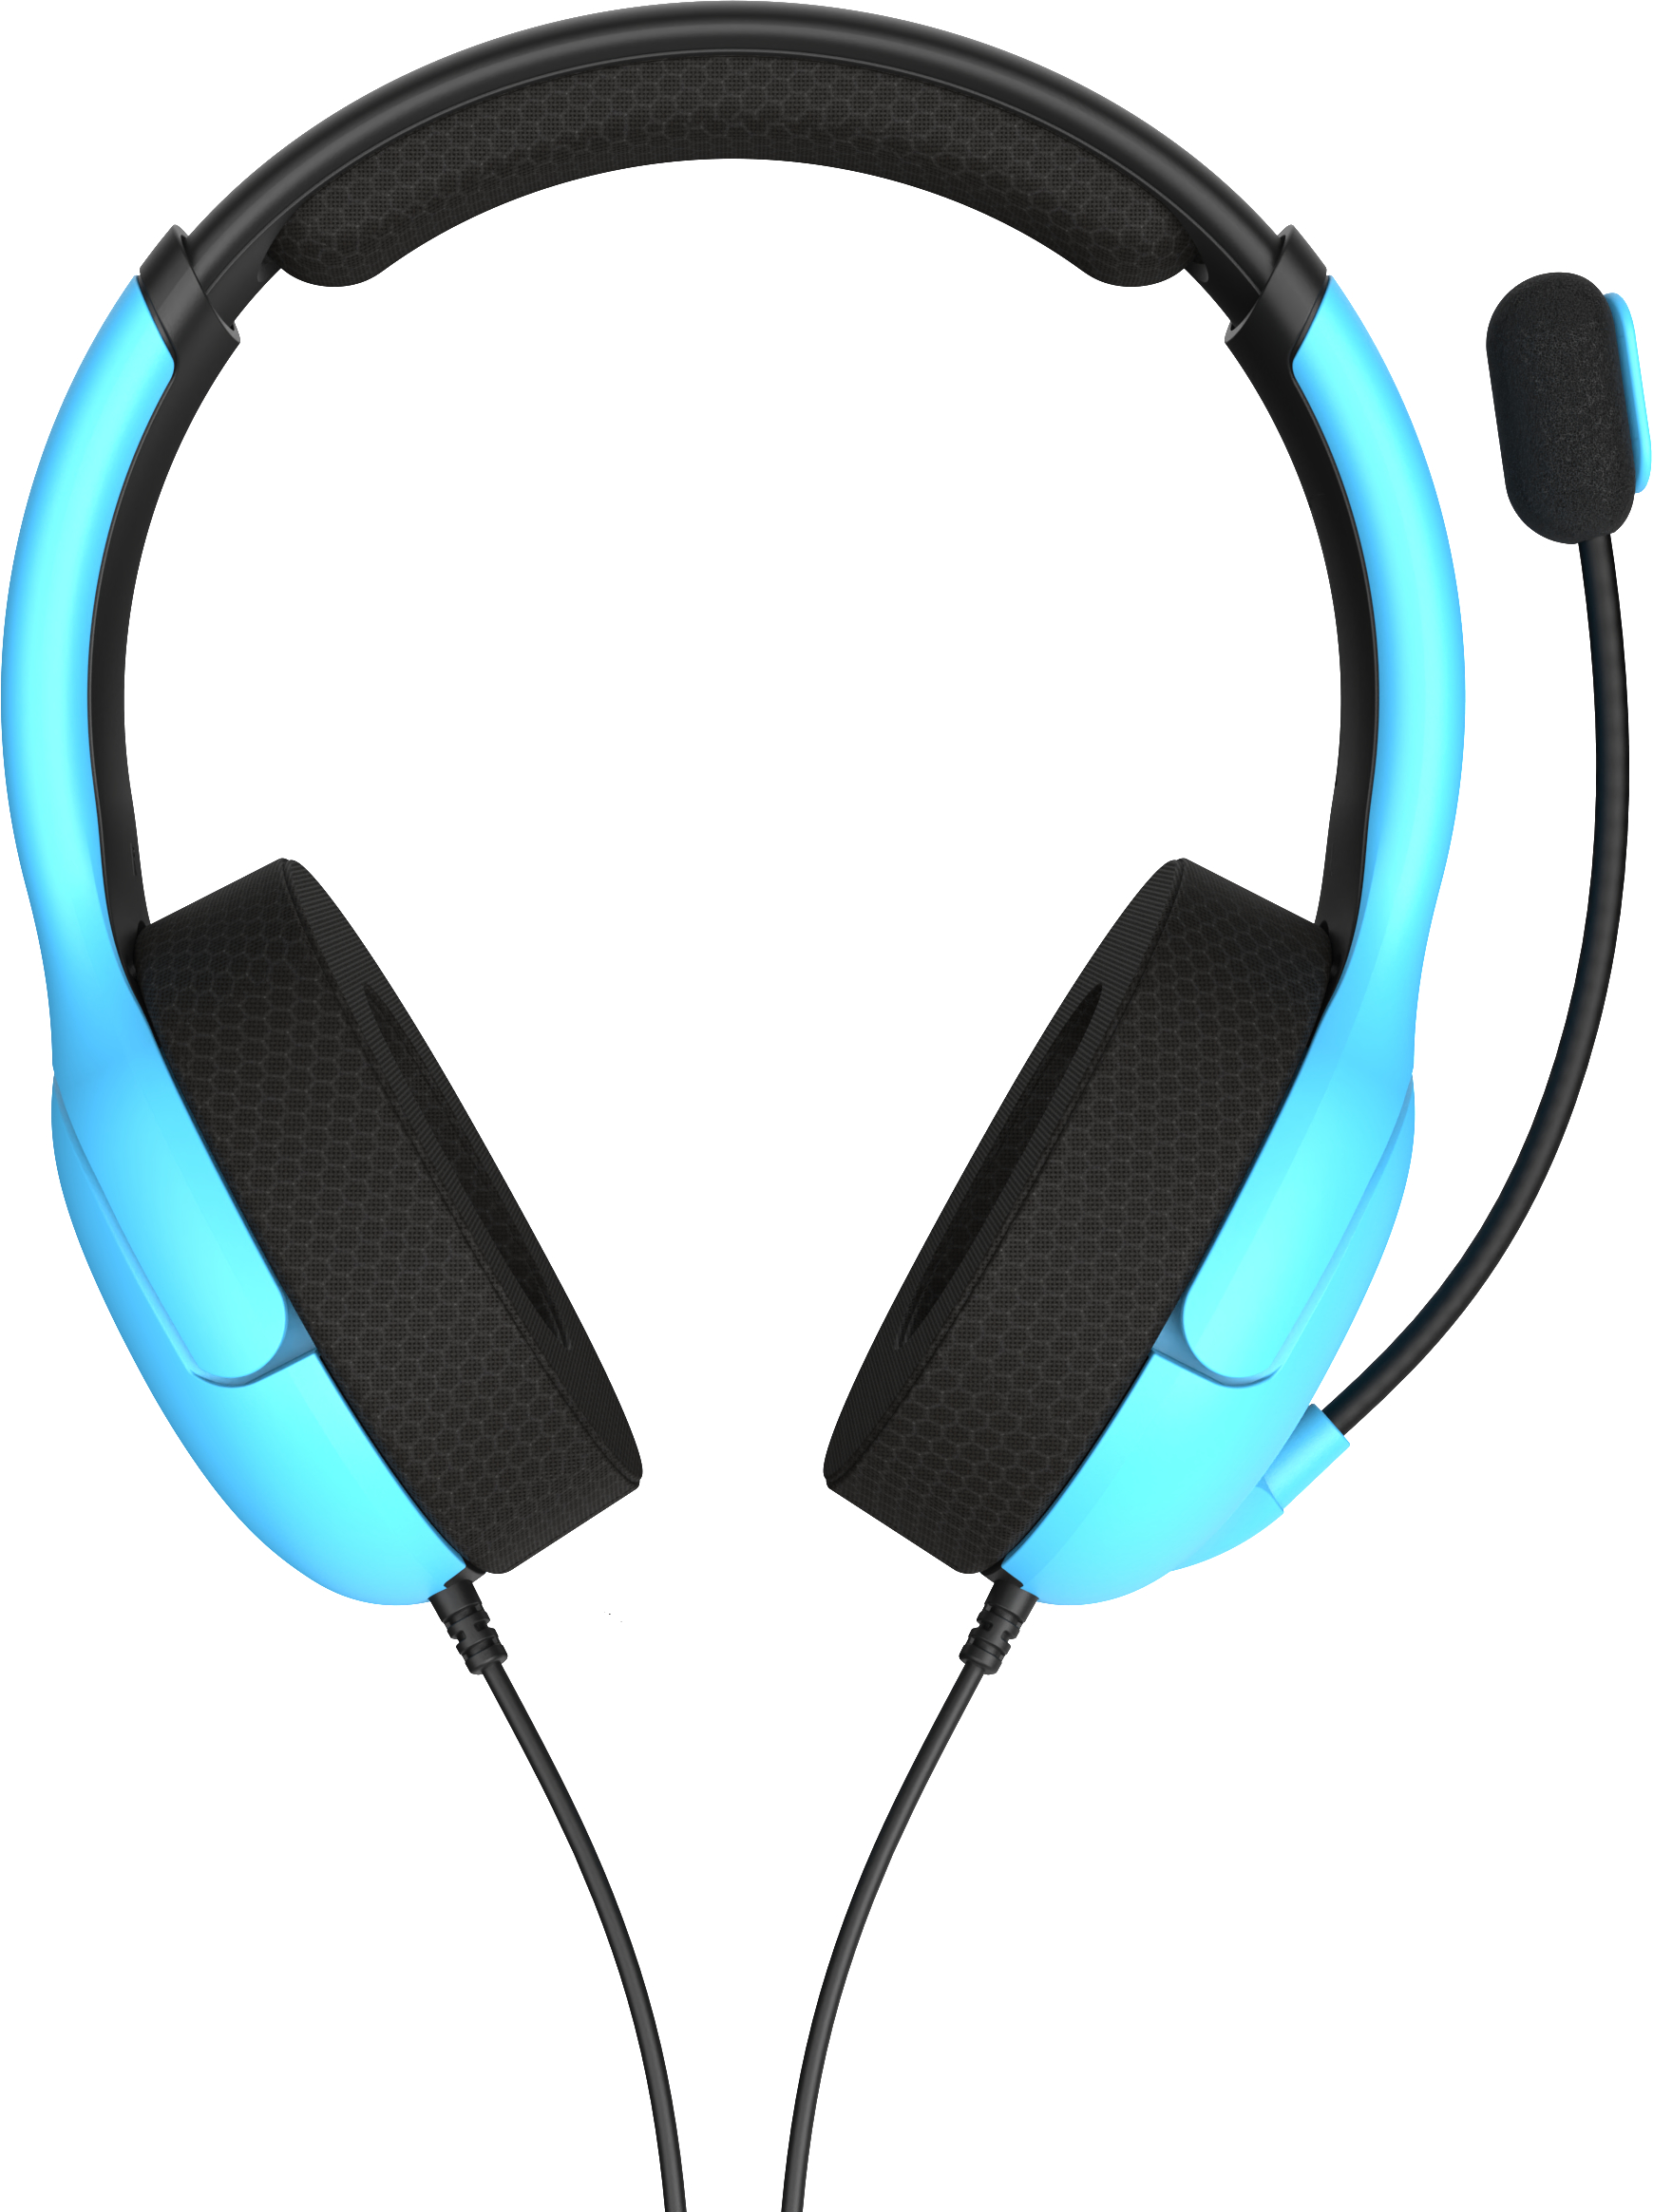 PDP Airlite Wired Stereo Headset 052-011-BL PS5, Neptune Blue PS5, Neptune Blue